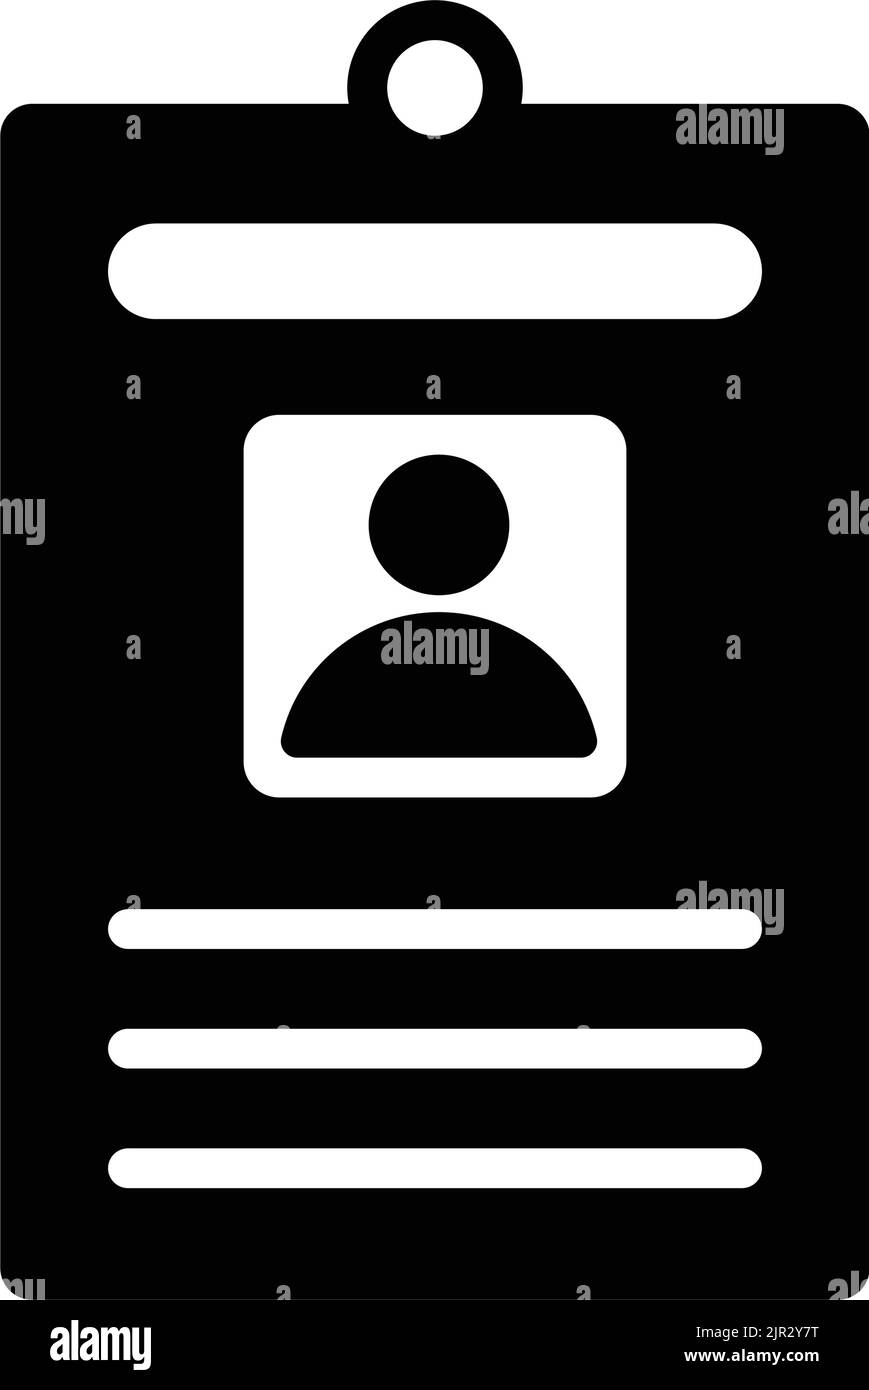 Card, id icon - Vector EPS file. Perfect use for print media, web, stock images, commercial use or any kind of design project. Stock Vector